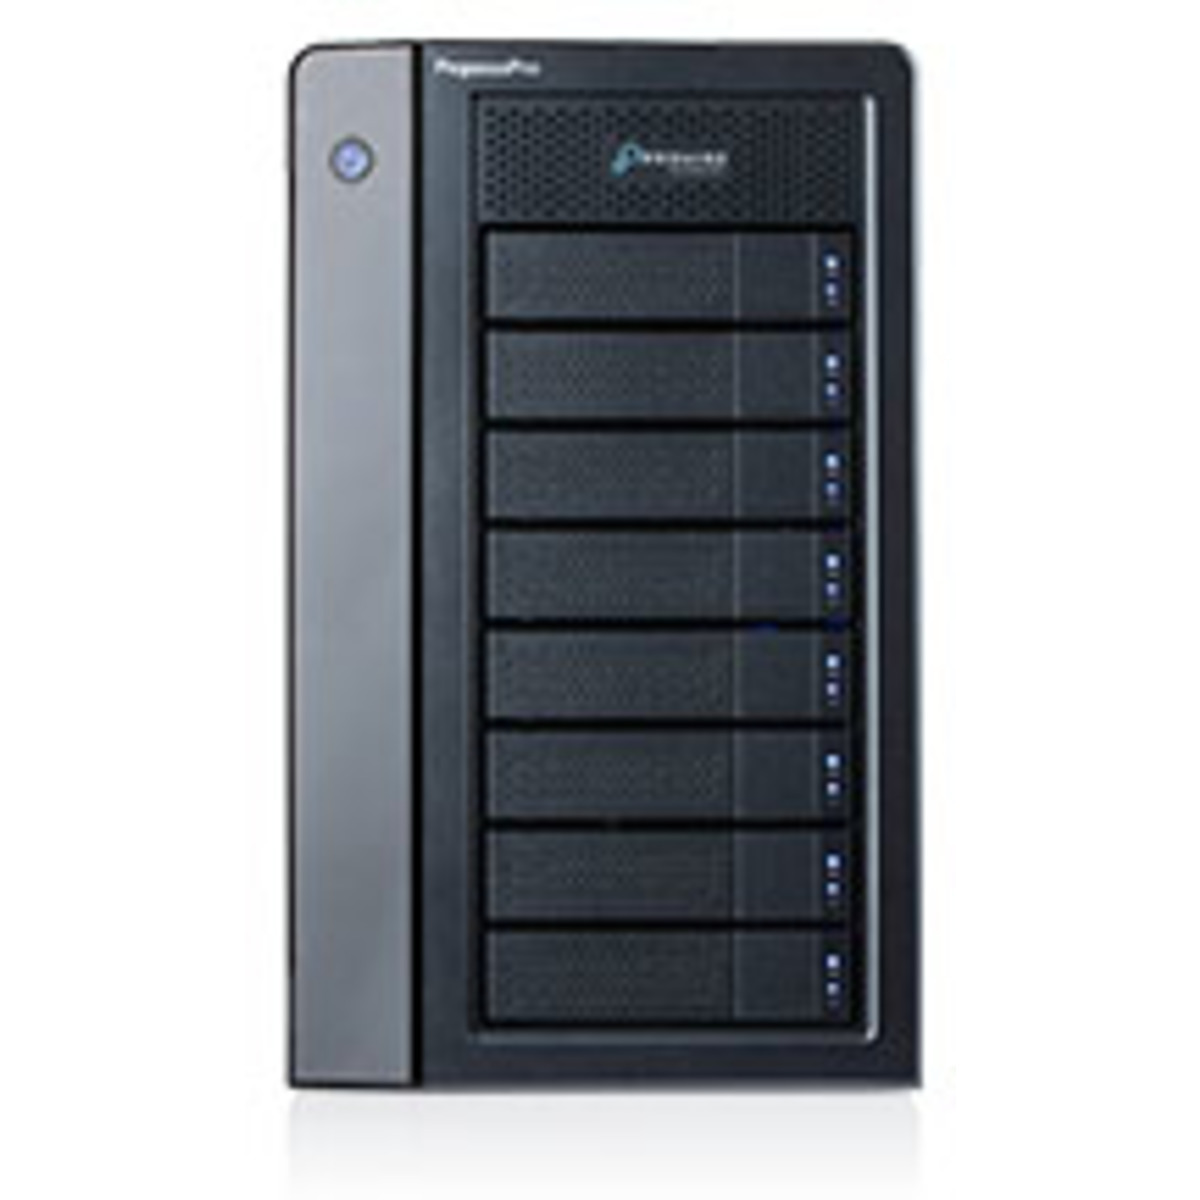 buy $8354 Promise Technology PegasusPro R8 64tb Desktop DAS-NAS - Combo Direct + Network Storage Device 8x8000gb Toshiba Enterprise Capacity MG08ADA800E 3.5 7200rpm SATA 6Gb/s HDD ENTERPRISE Class Drives Installed - Burn-In Tested - ON SALE - nas headquarters buy network attached storage server device das new raid-5 free shipping usa PegasusPro R8